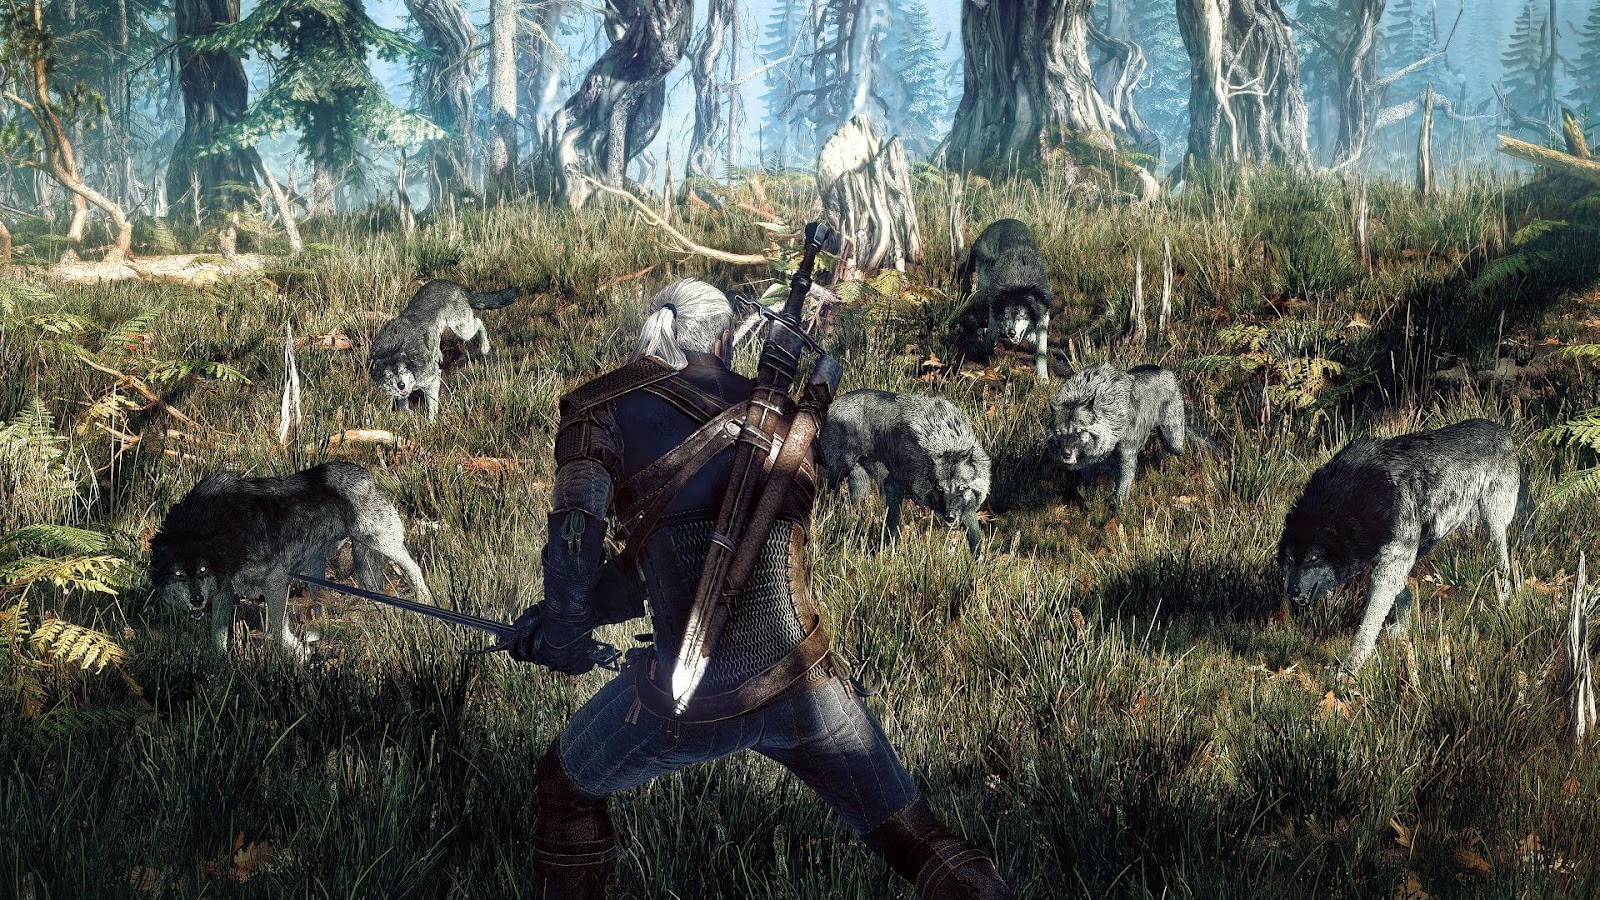 This mod for The Witcher 3 makes the wolves fight alongside Geralt